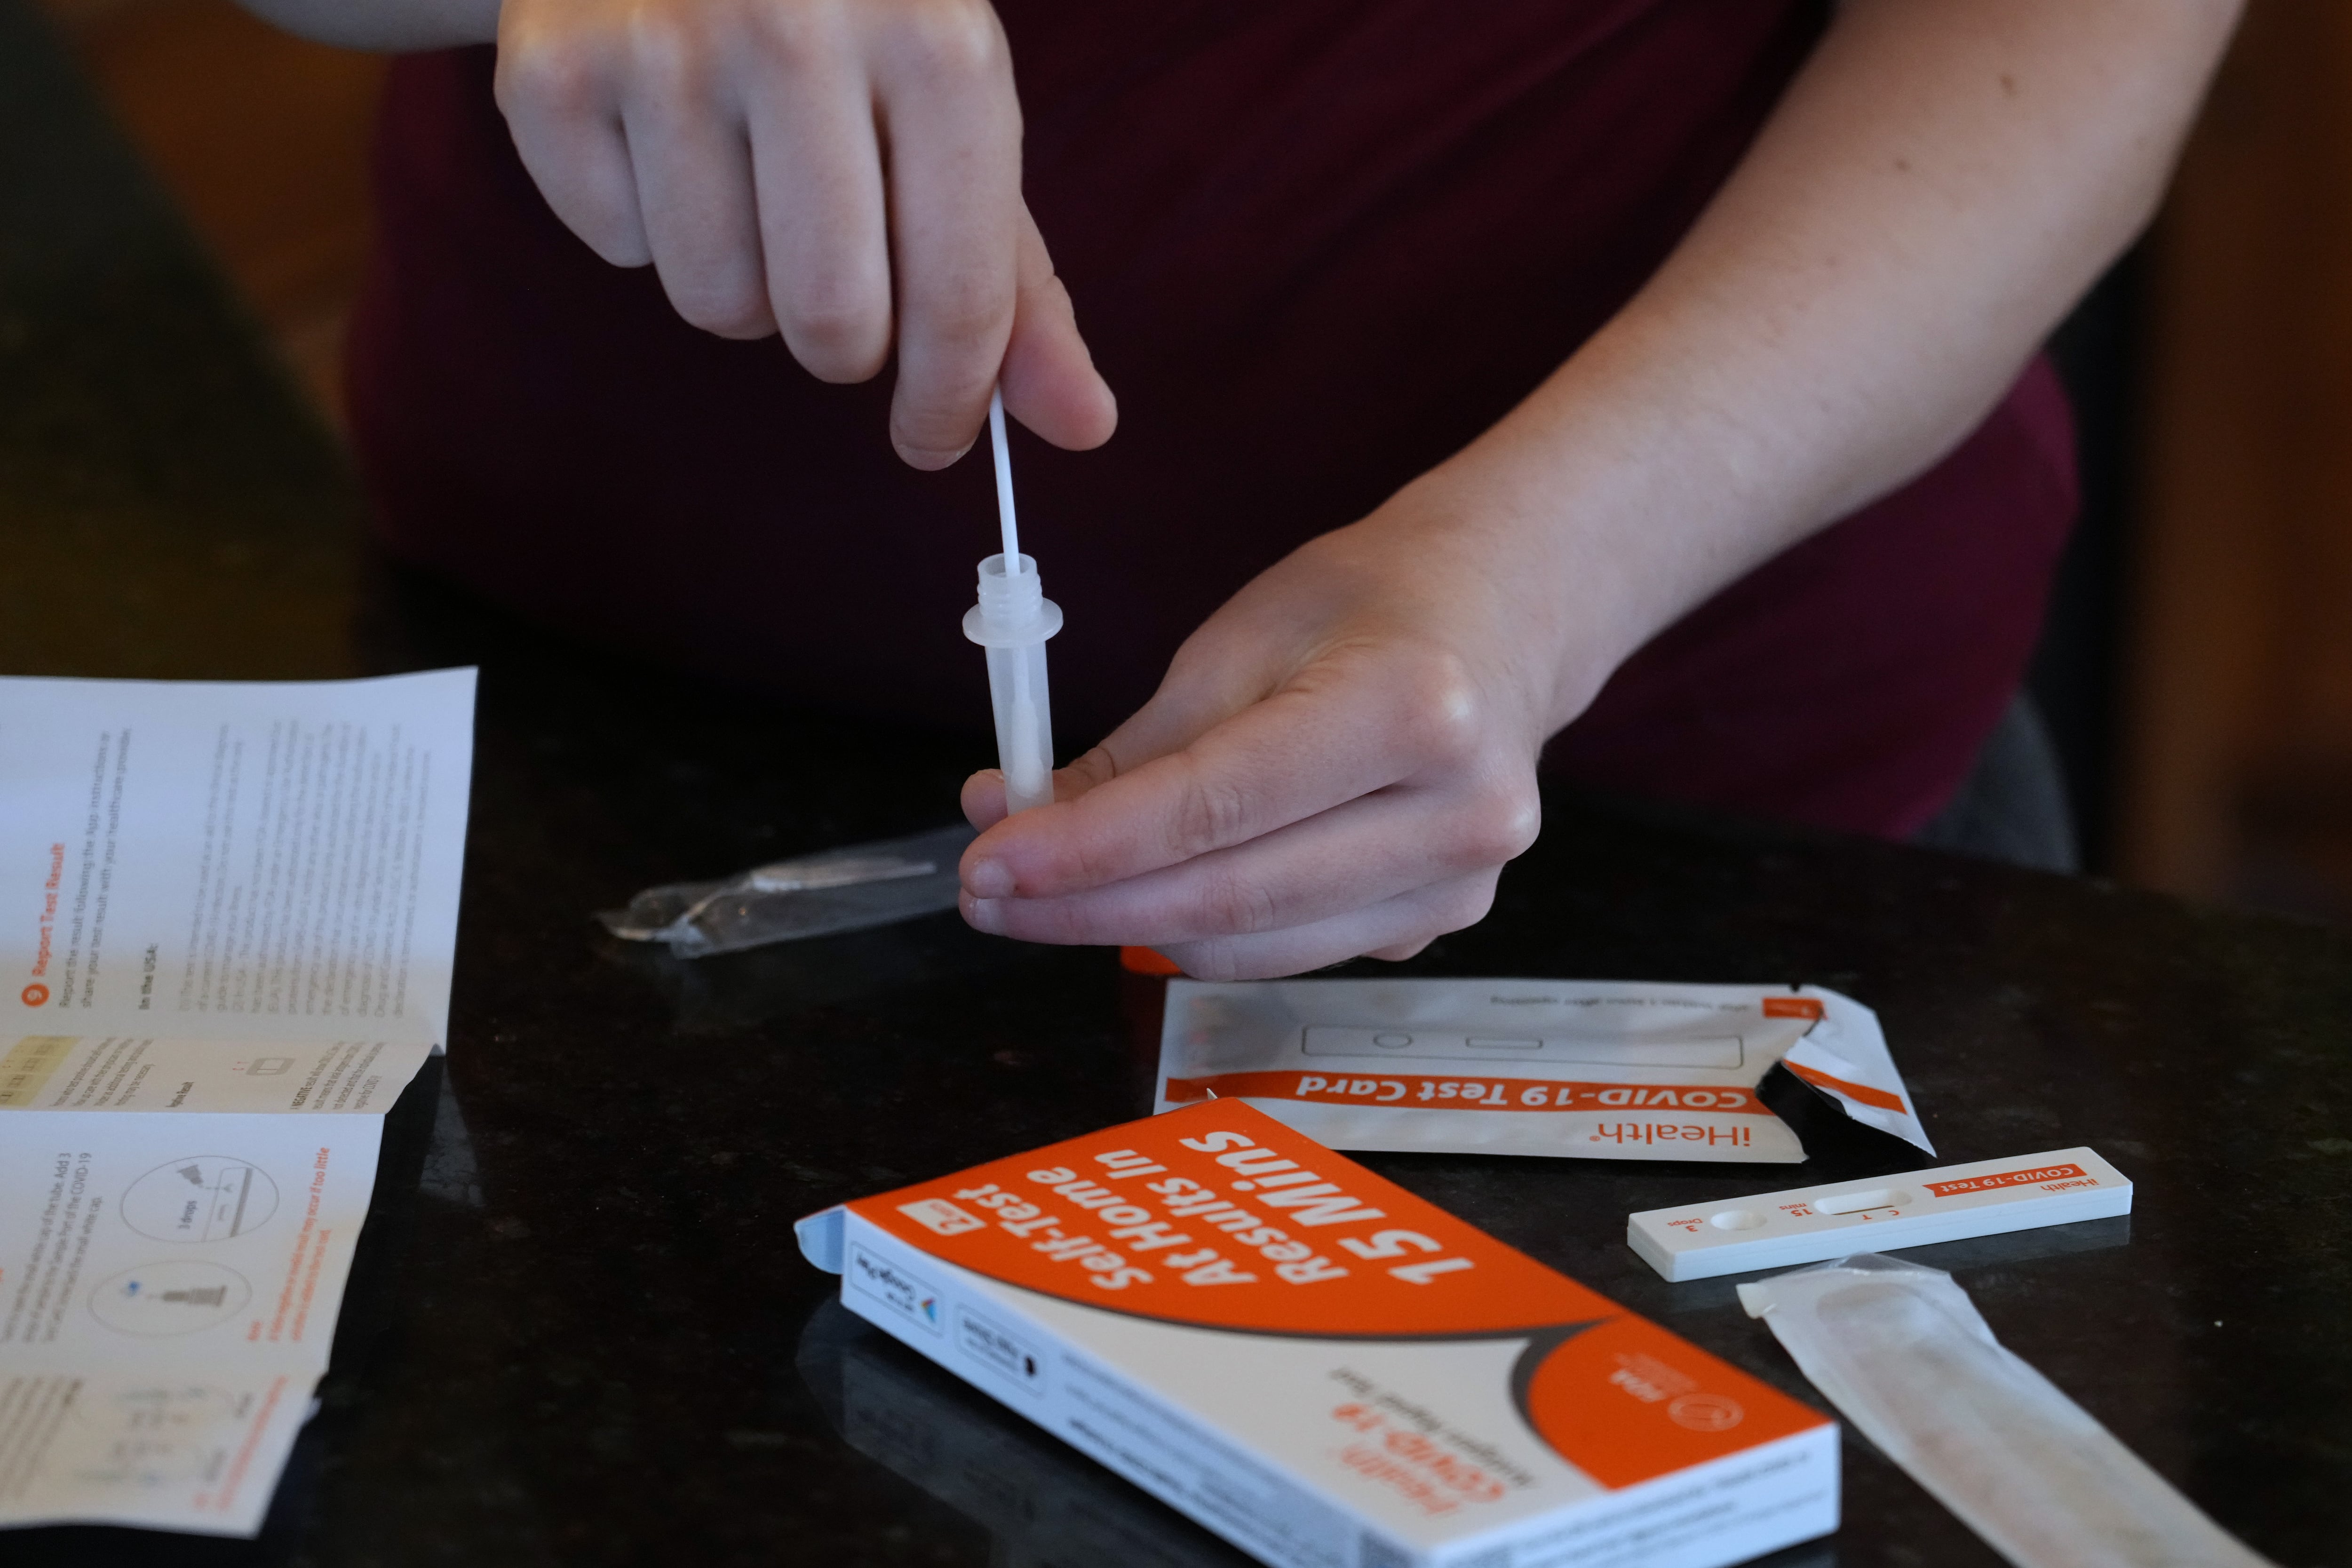 A COVID-19 at-home rapid test package is opened on a table as someone dips a swab into the tube that is included with the kit.